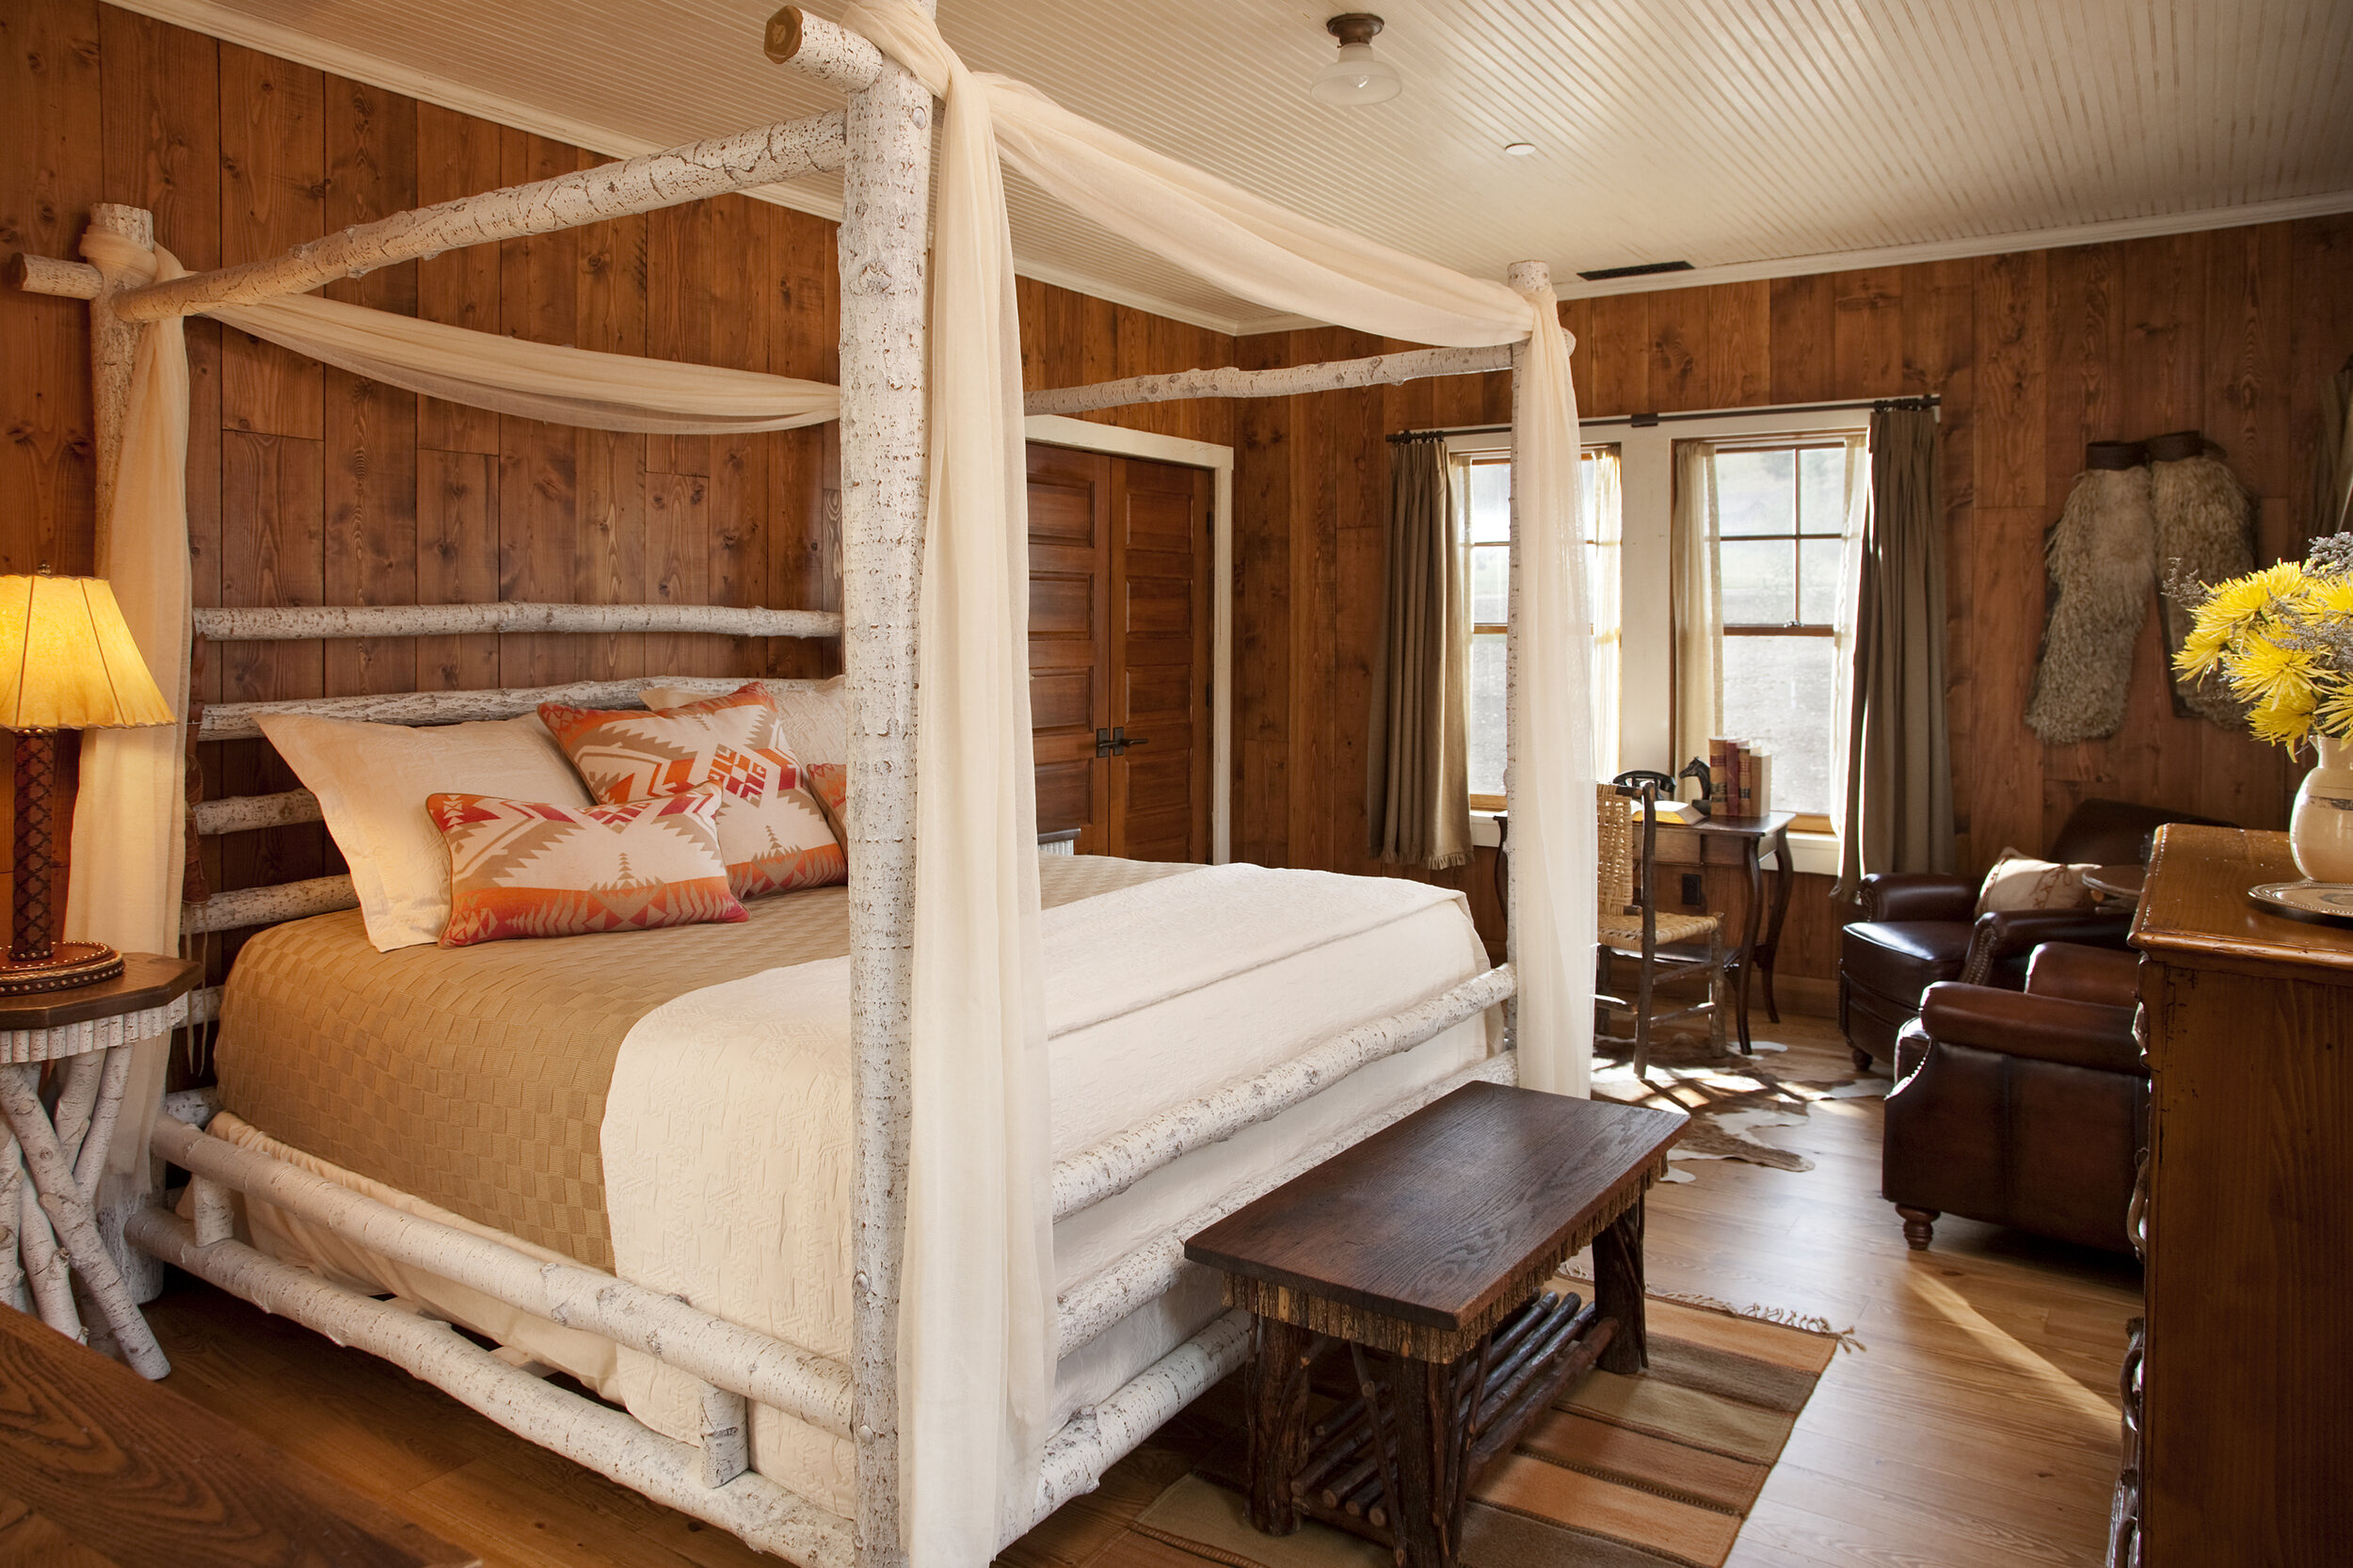   Lodge Suite in the Granite Lodge (photo credit: The Ranch at Rock Creek)  